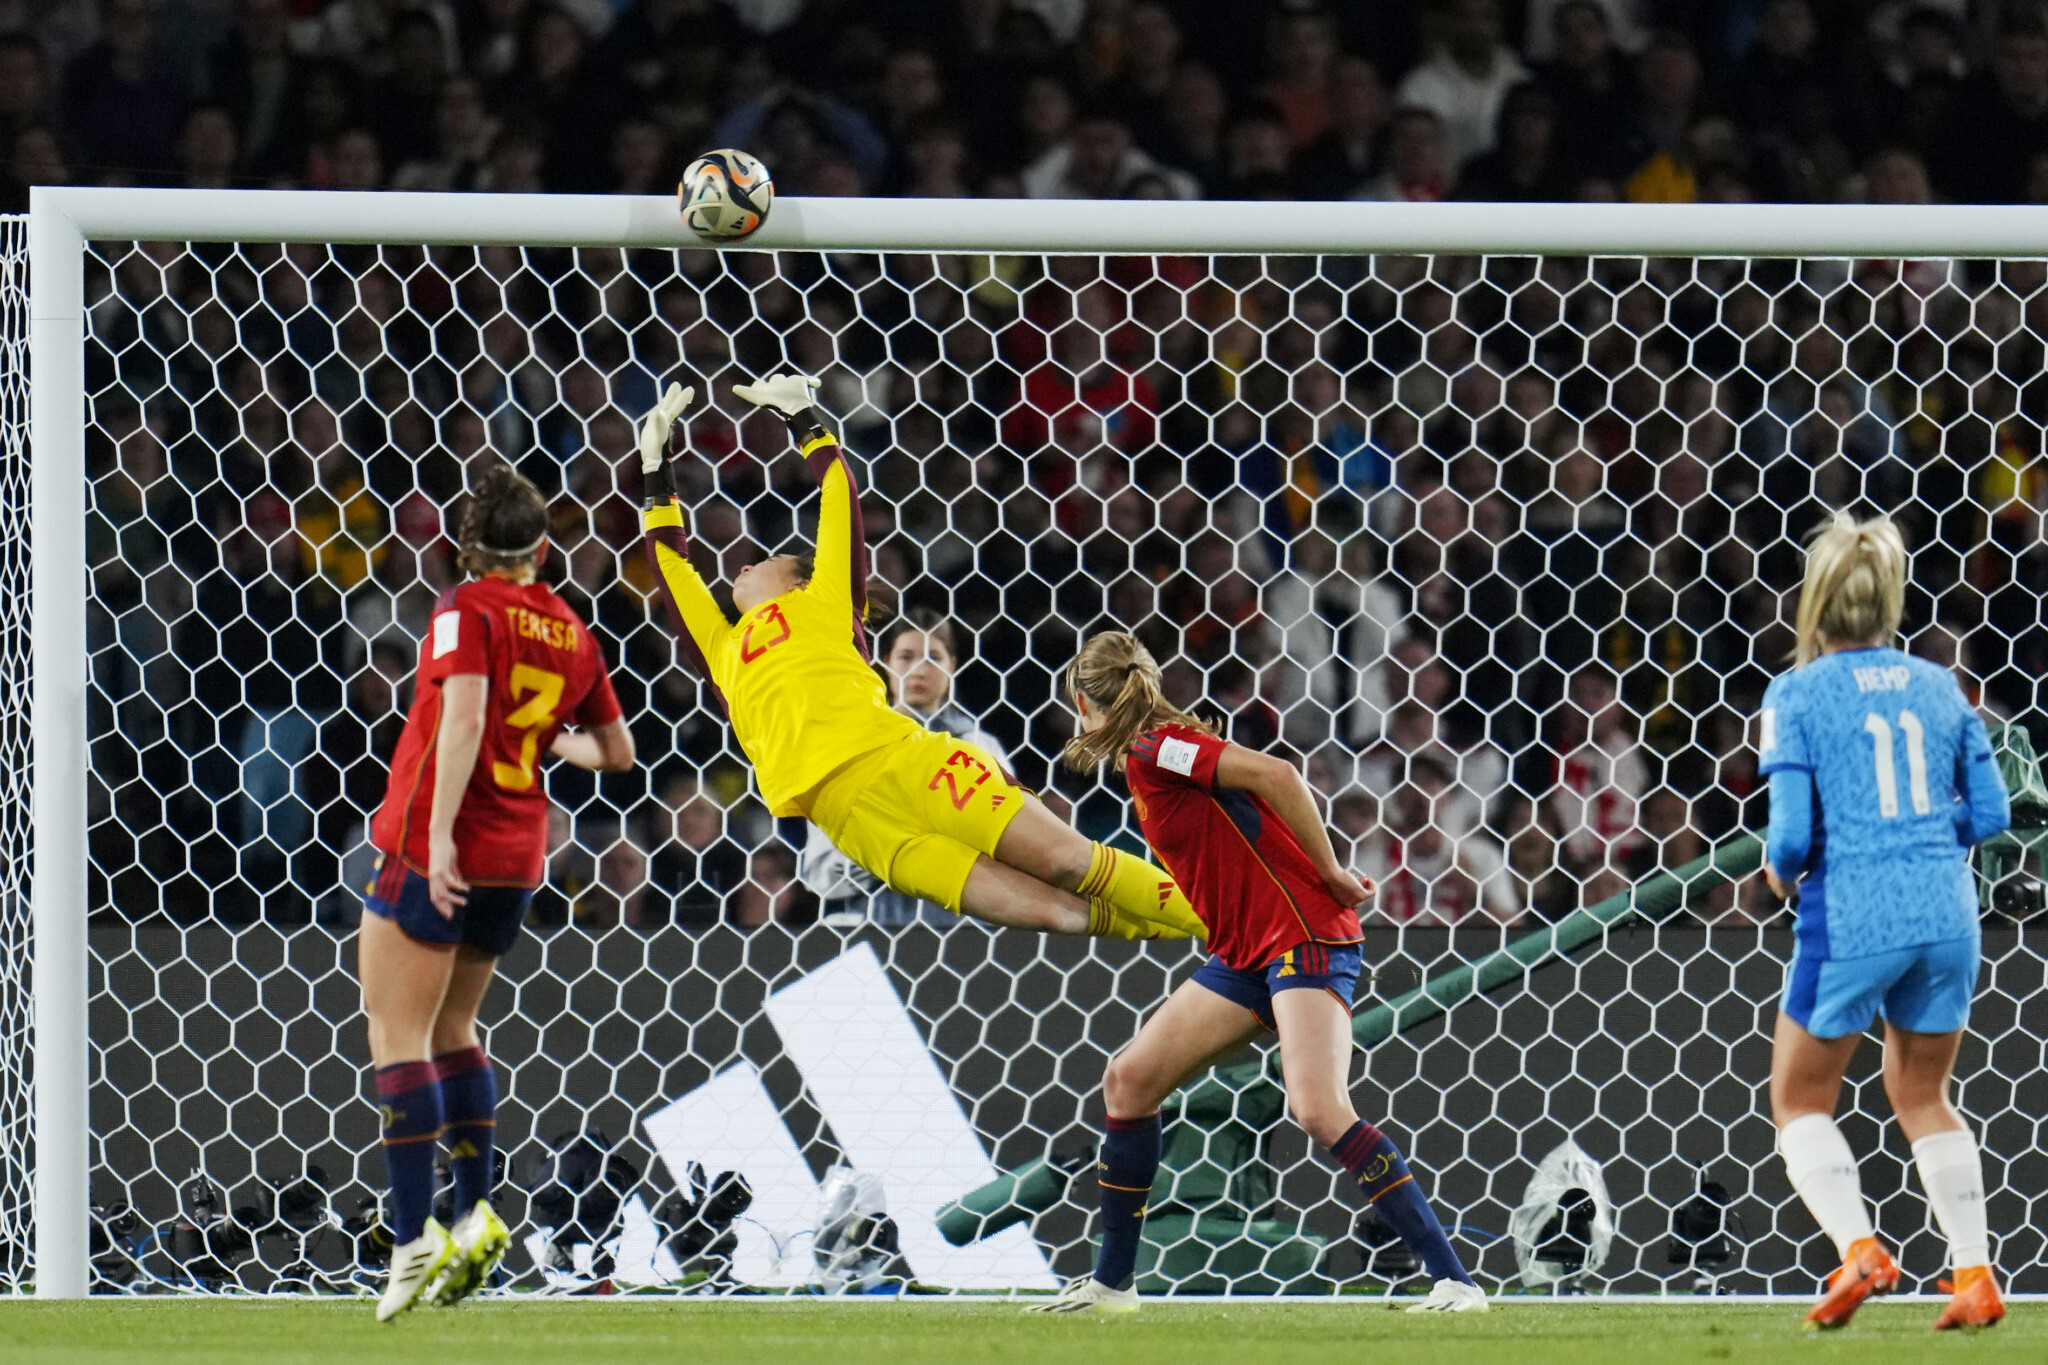 Olga Carmona: Olga Carmona: The Spanish Star who etched history at the 2023  Women's World Cup against Engalnd - The Economic Times